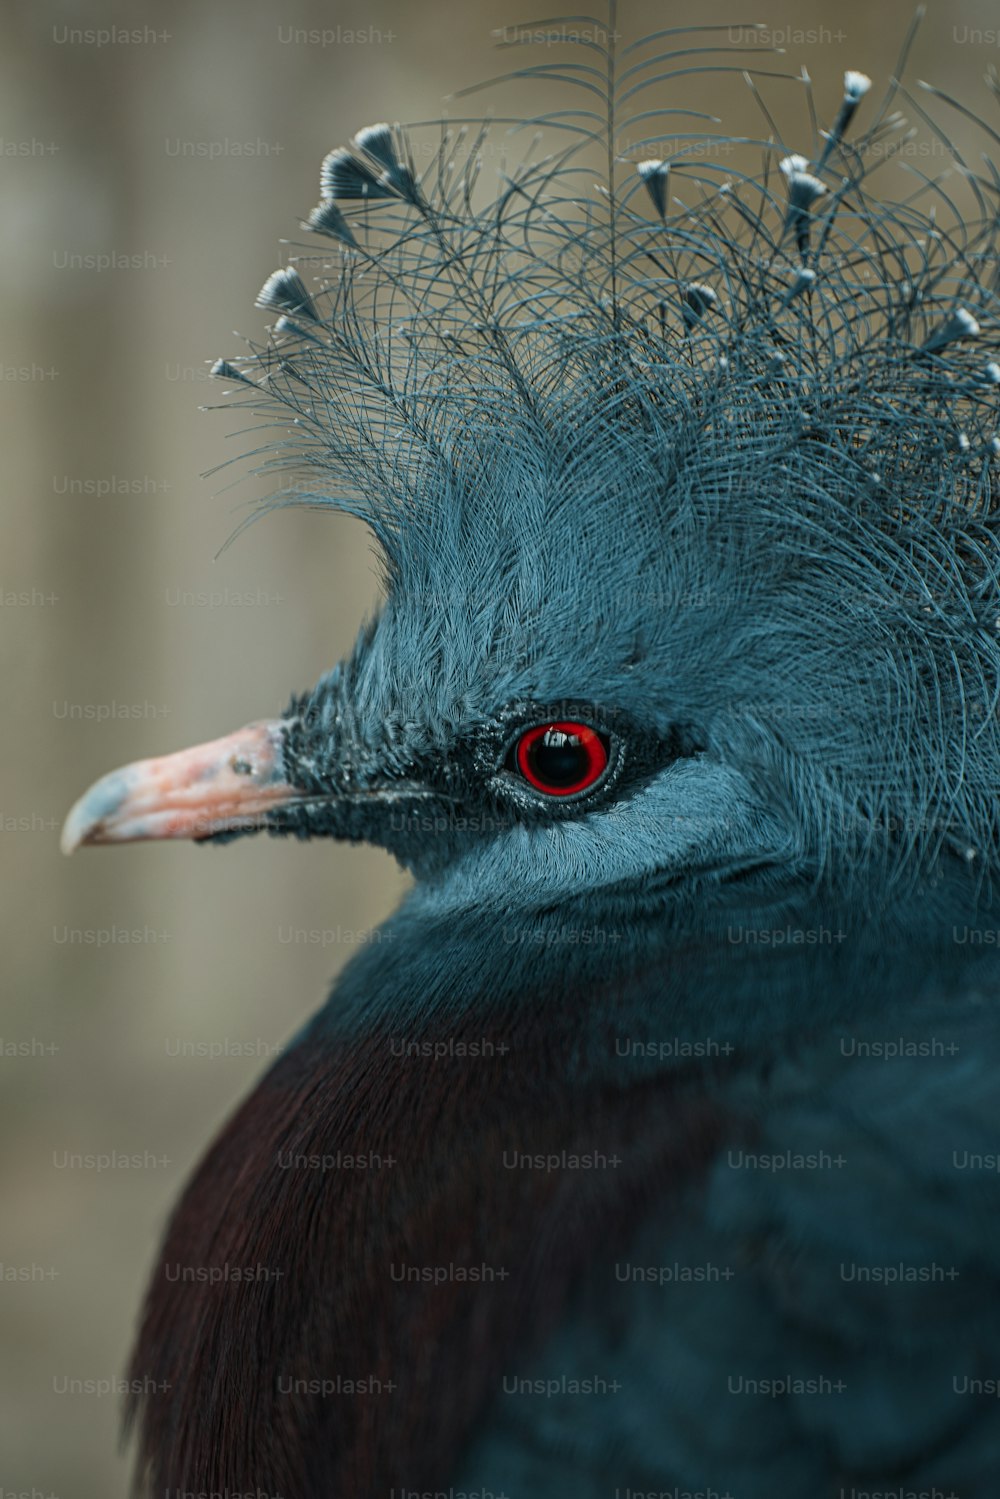 Premium AI Image  The green feathers of a bird